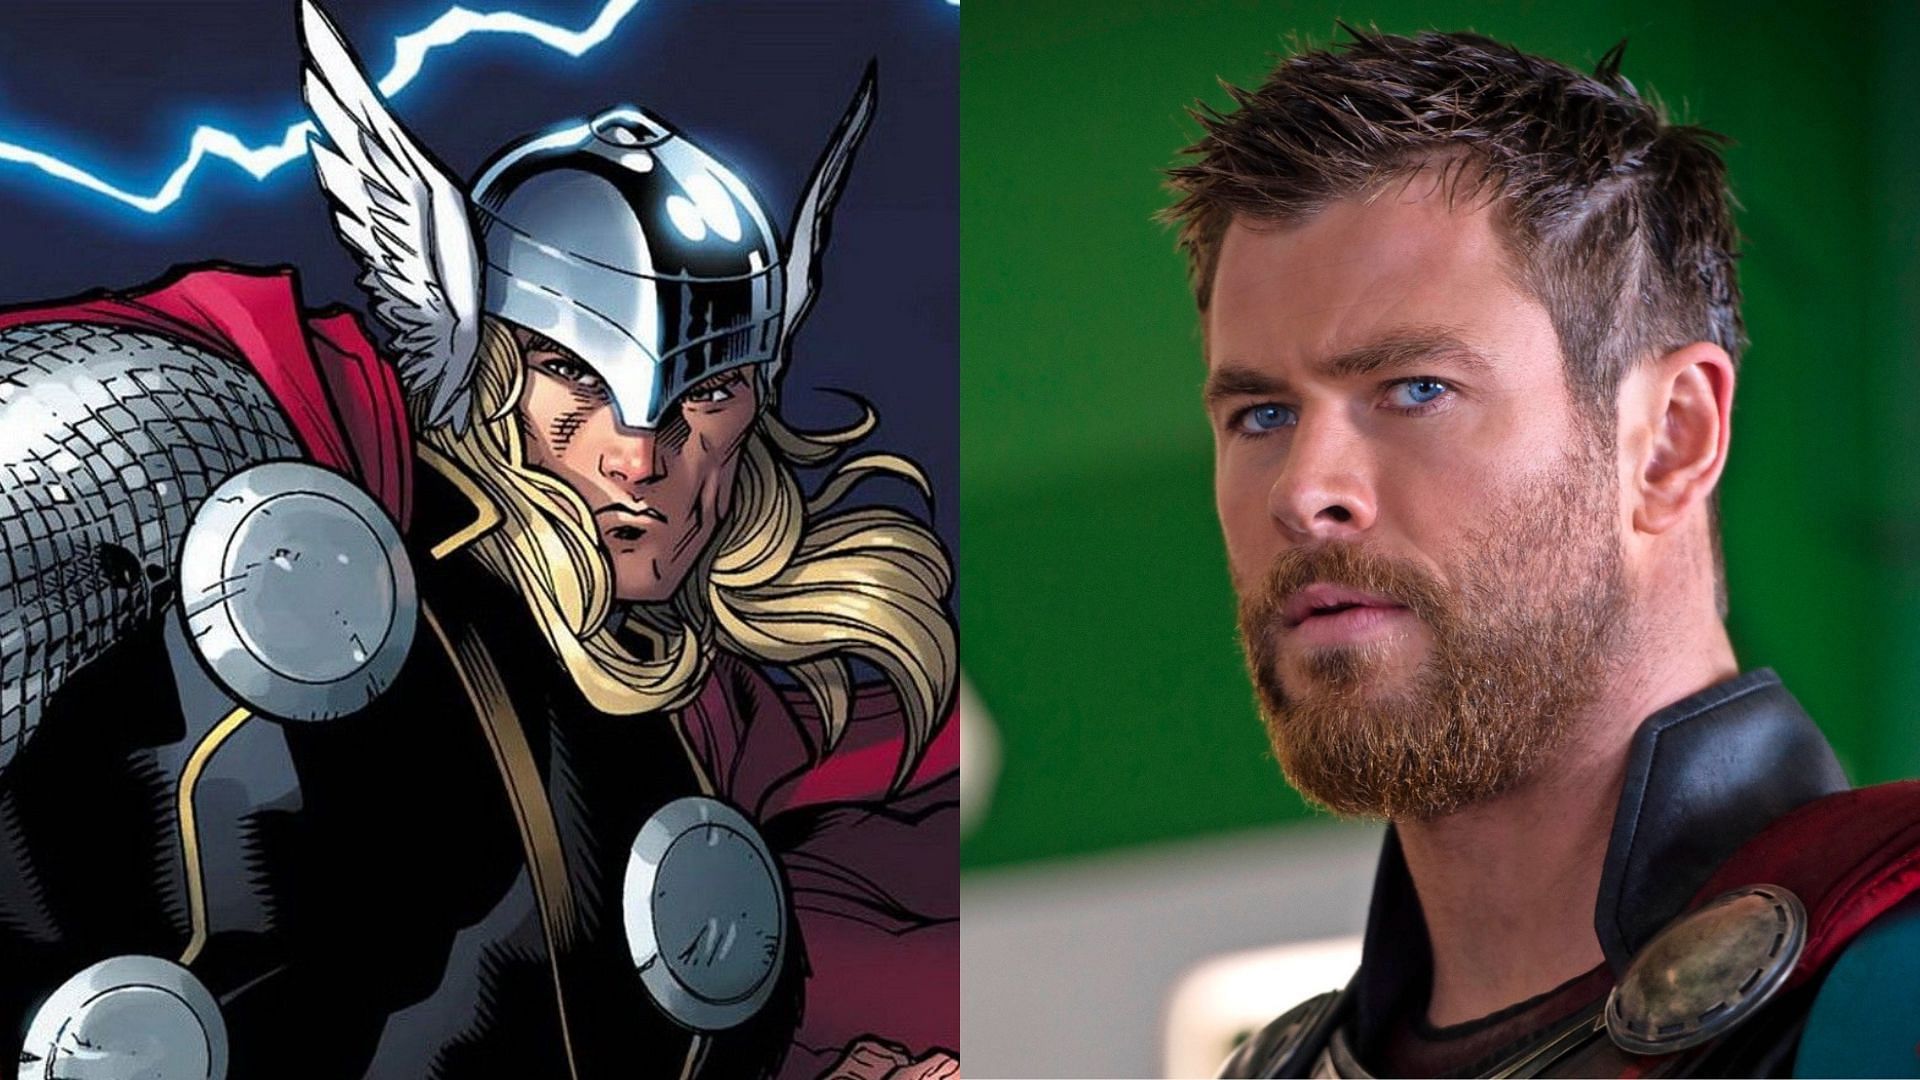 Left: Thor in comics, Right: Thor played by Chris Hemsworth in the MCU (Images via Marvel)